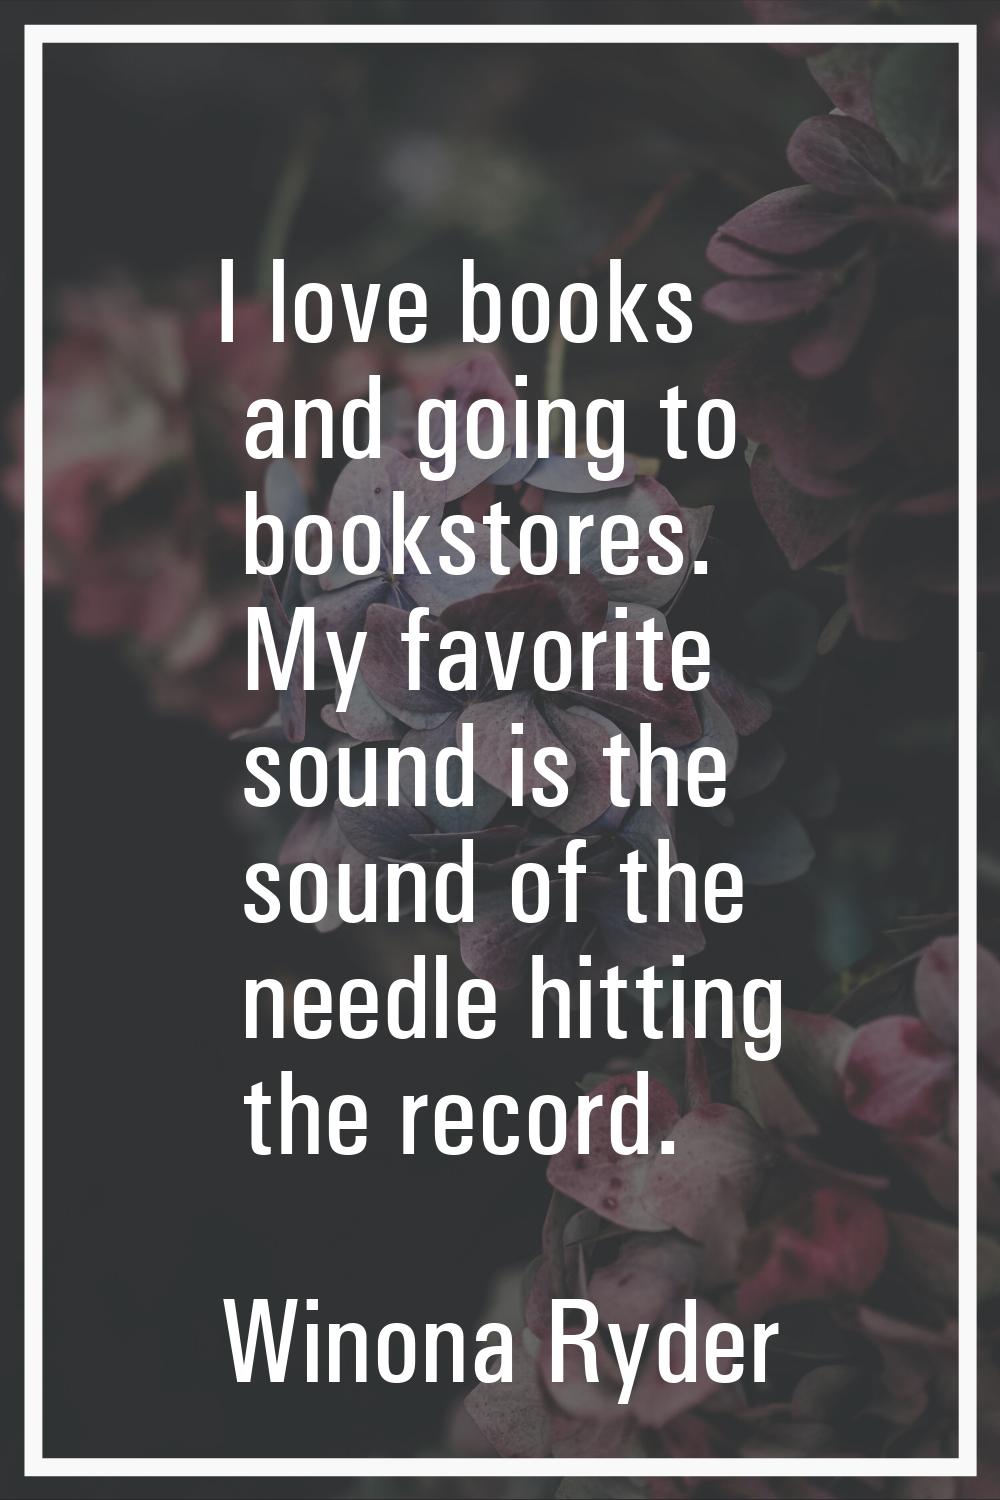 I love books and going to bookstores. My favorite sound is the sound of the needle hitting the reco